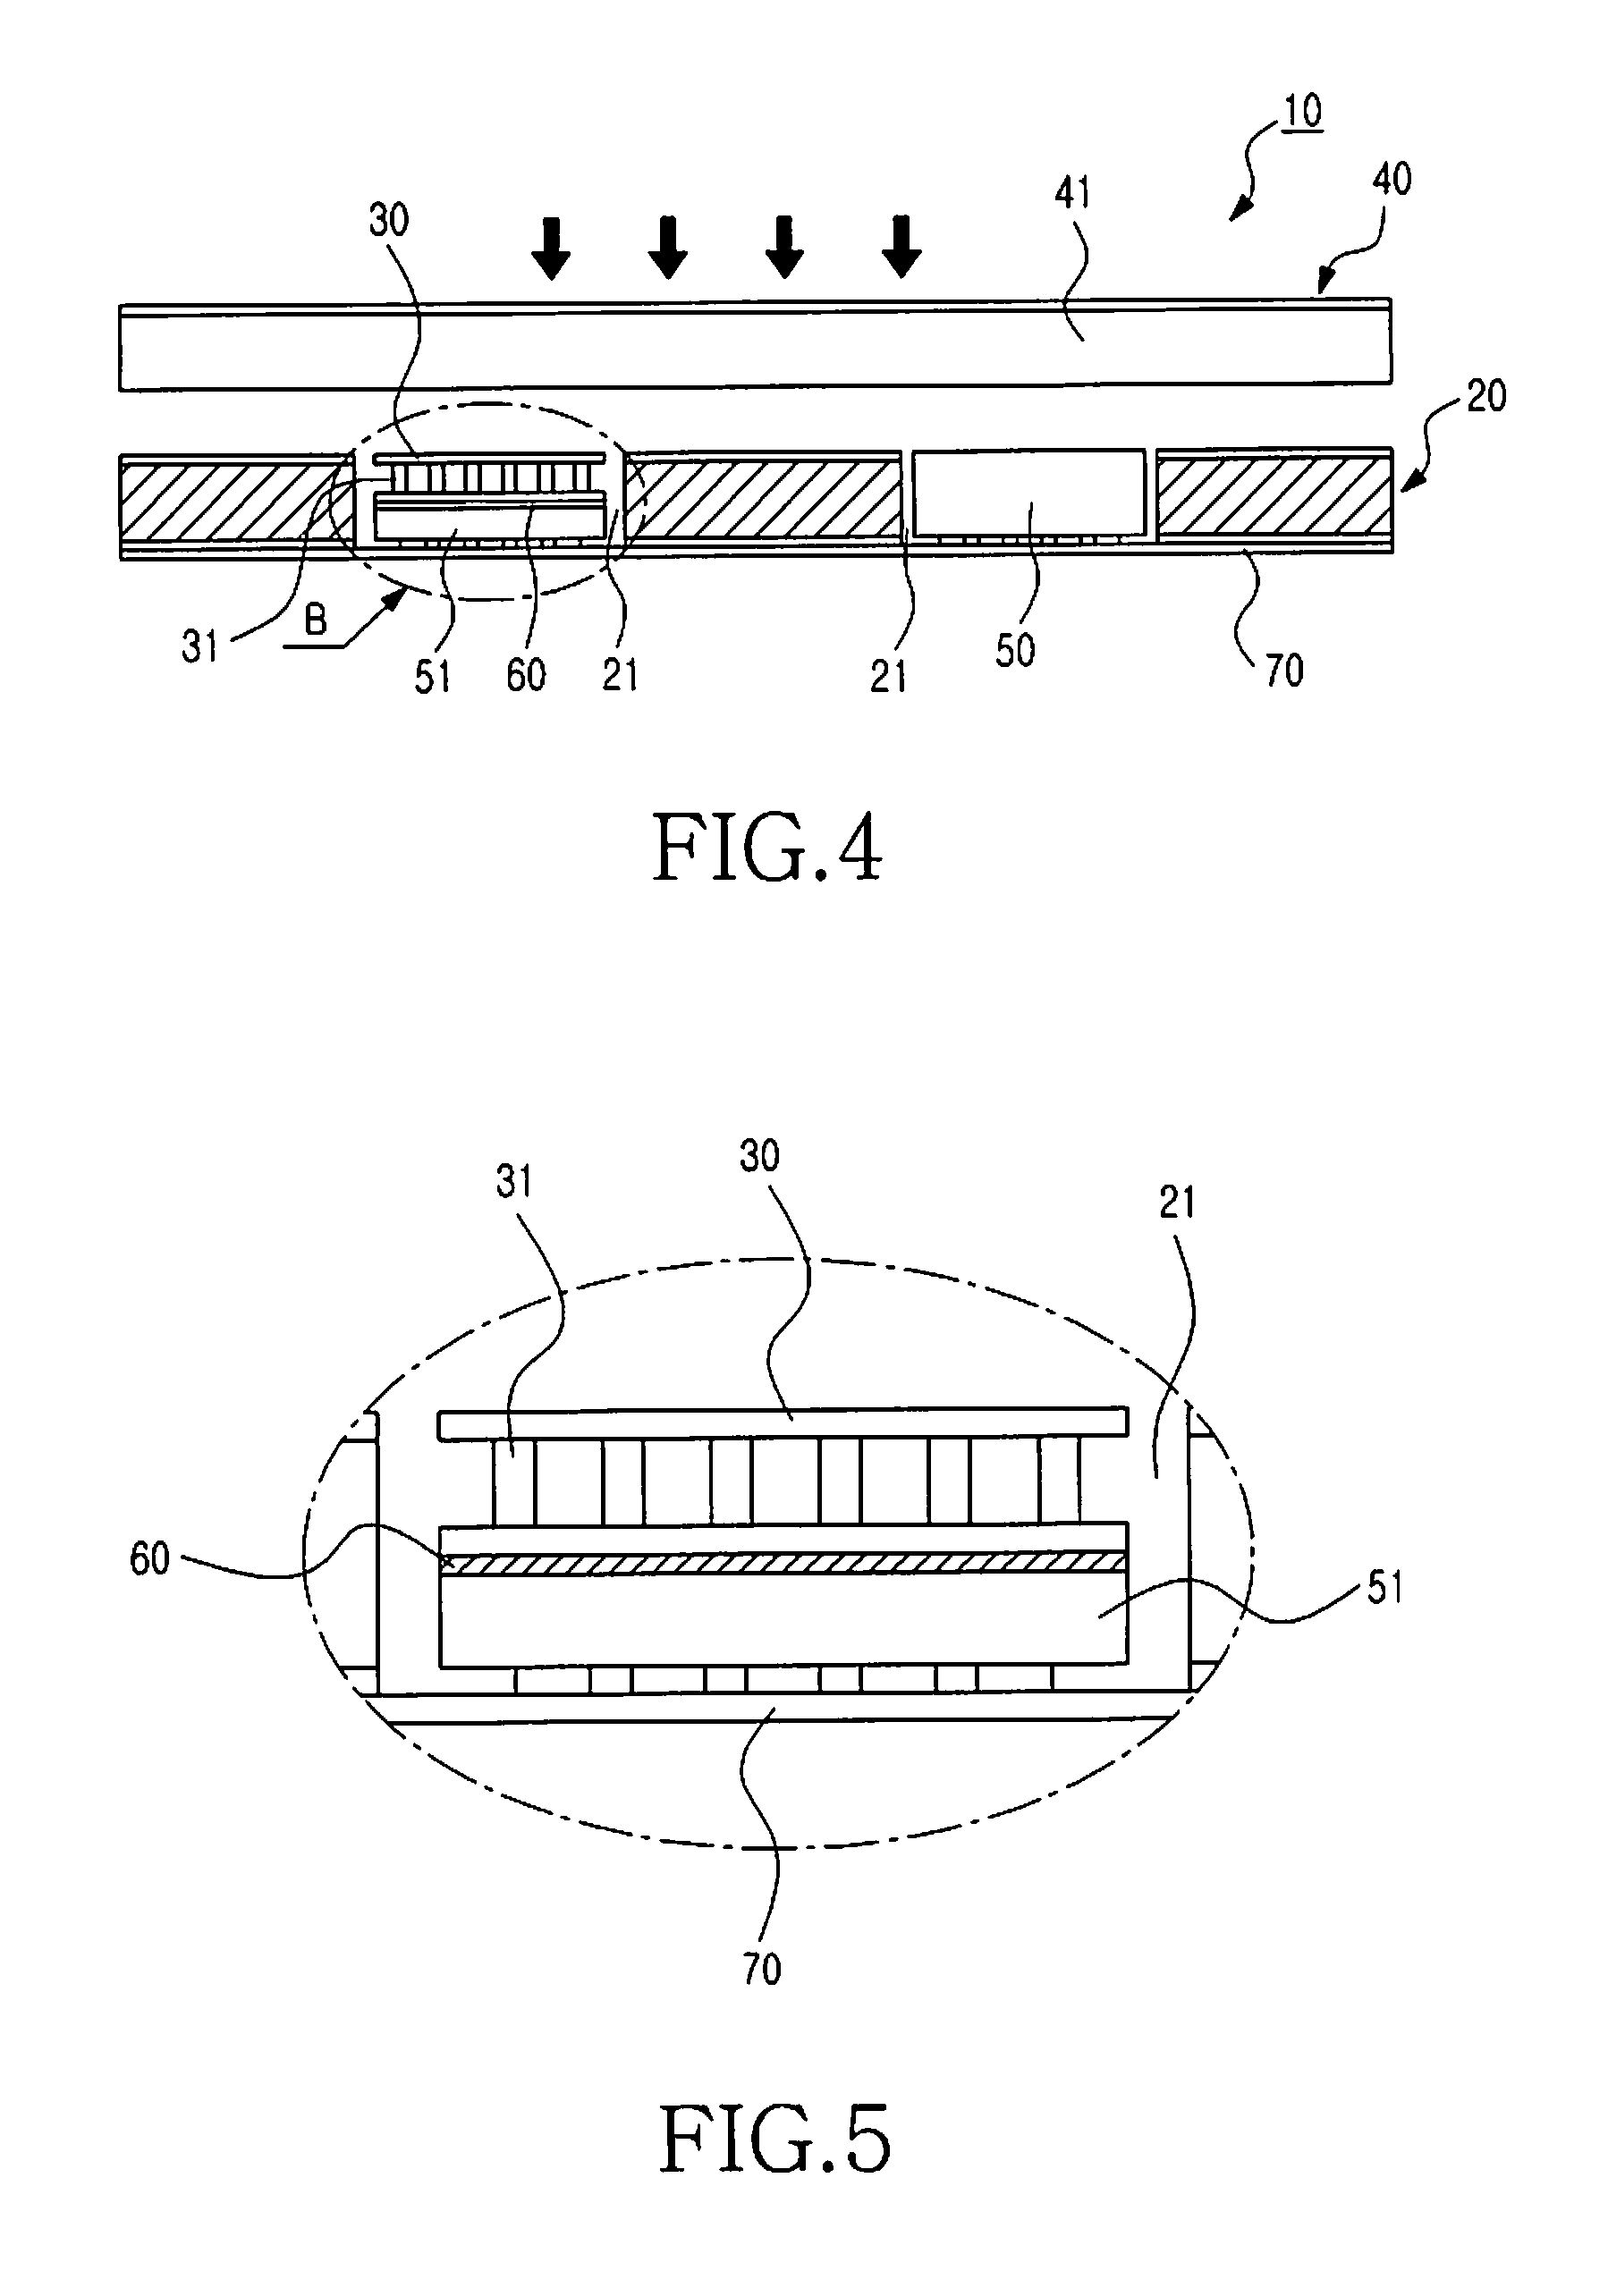 Embedded circuit board and manufacturing method thereof